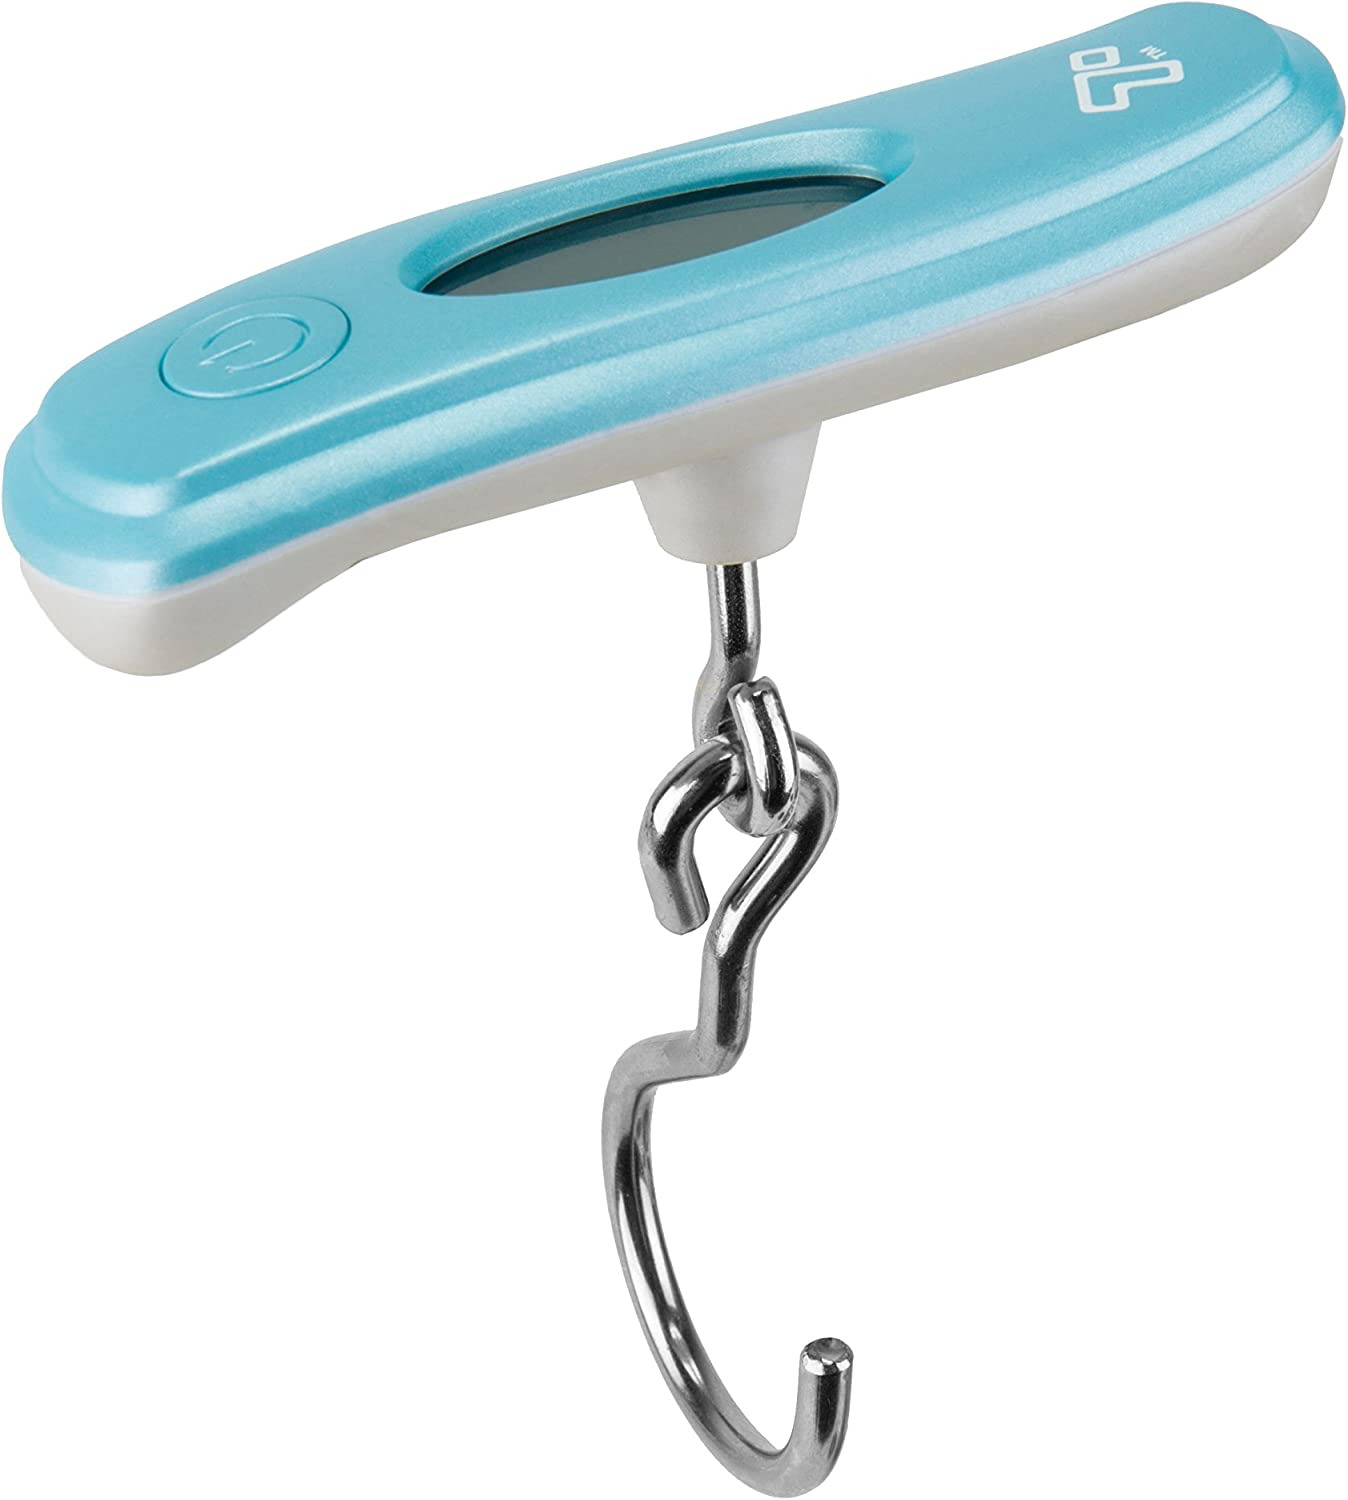 Travelon Get A Grip Compact Scale, Sky/silver, One Size